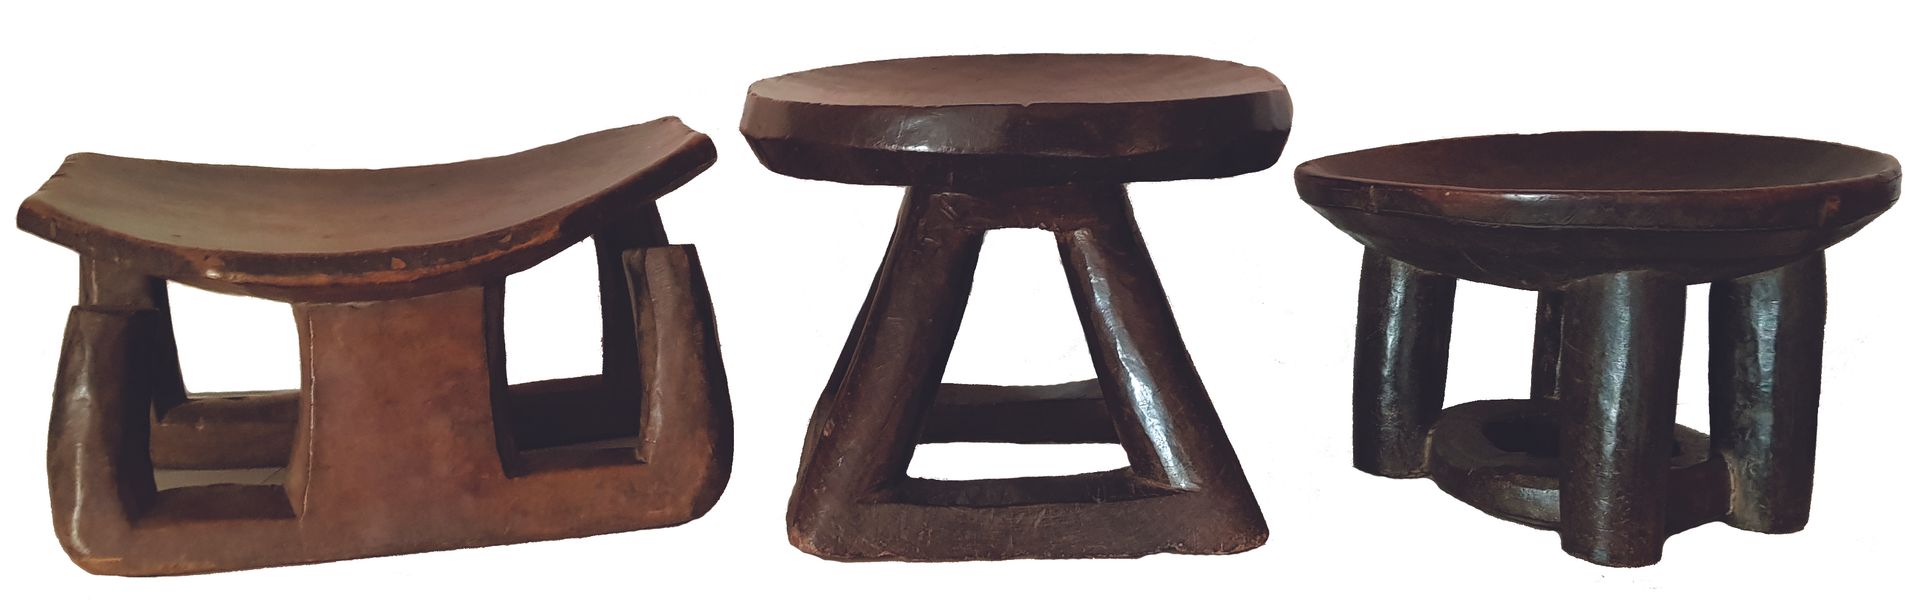 Lot de trois sièges africains 
Set of three African chairs. 



DELIVERY OF LOTS&hellip;